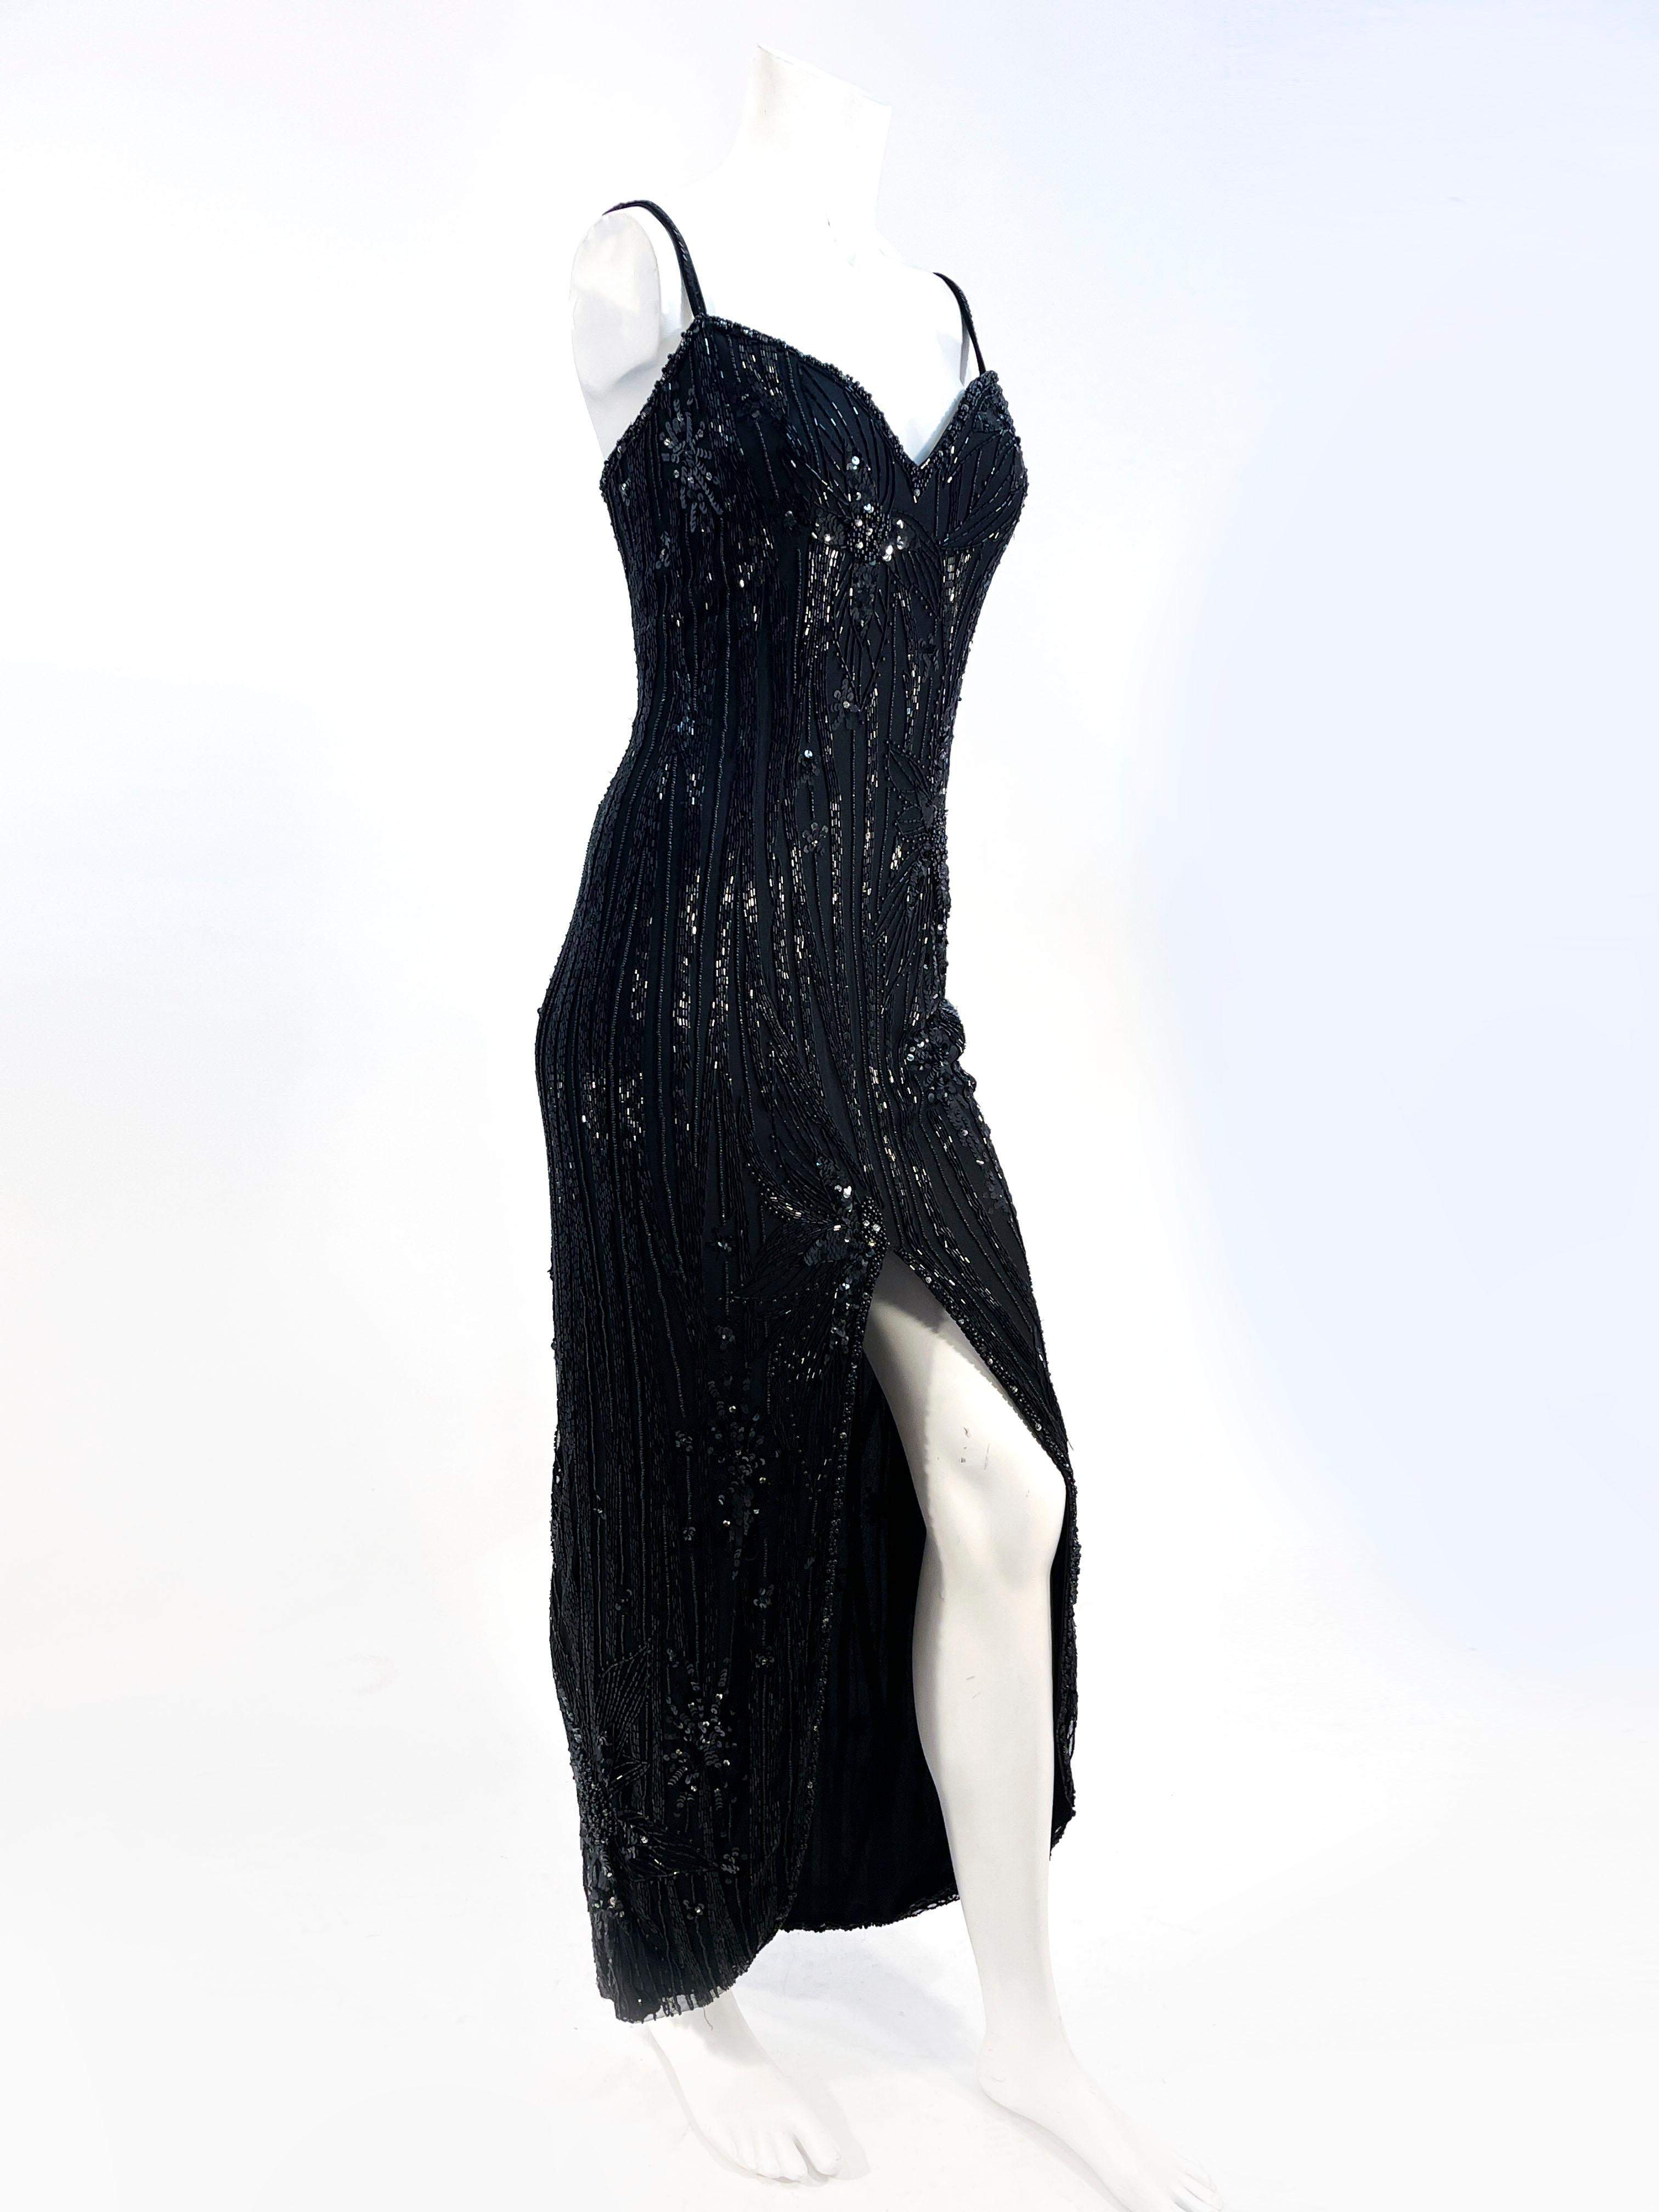 1980s Bob Mackie black evening gown featuring an abstract floral motif in glass bugle beading, sequin, and rhinestone. The bodice has a sweetheart neckline, narrow velvet and sequin straps, padding, and interior boning providing structure down to